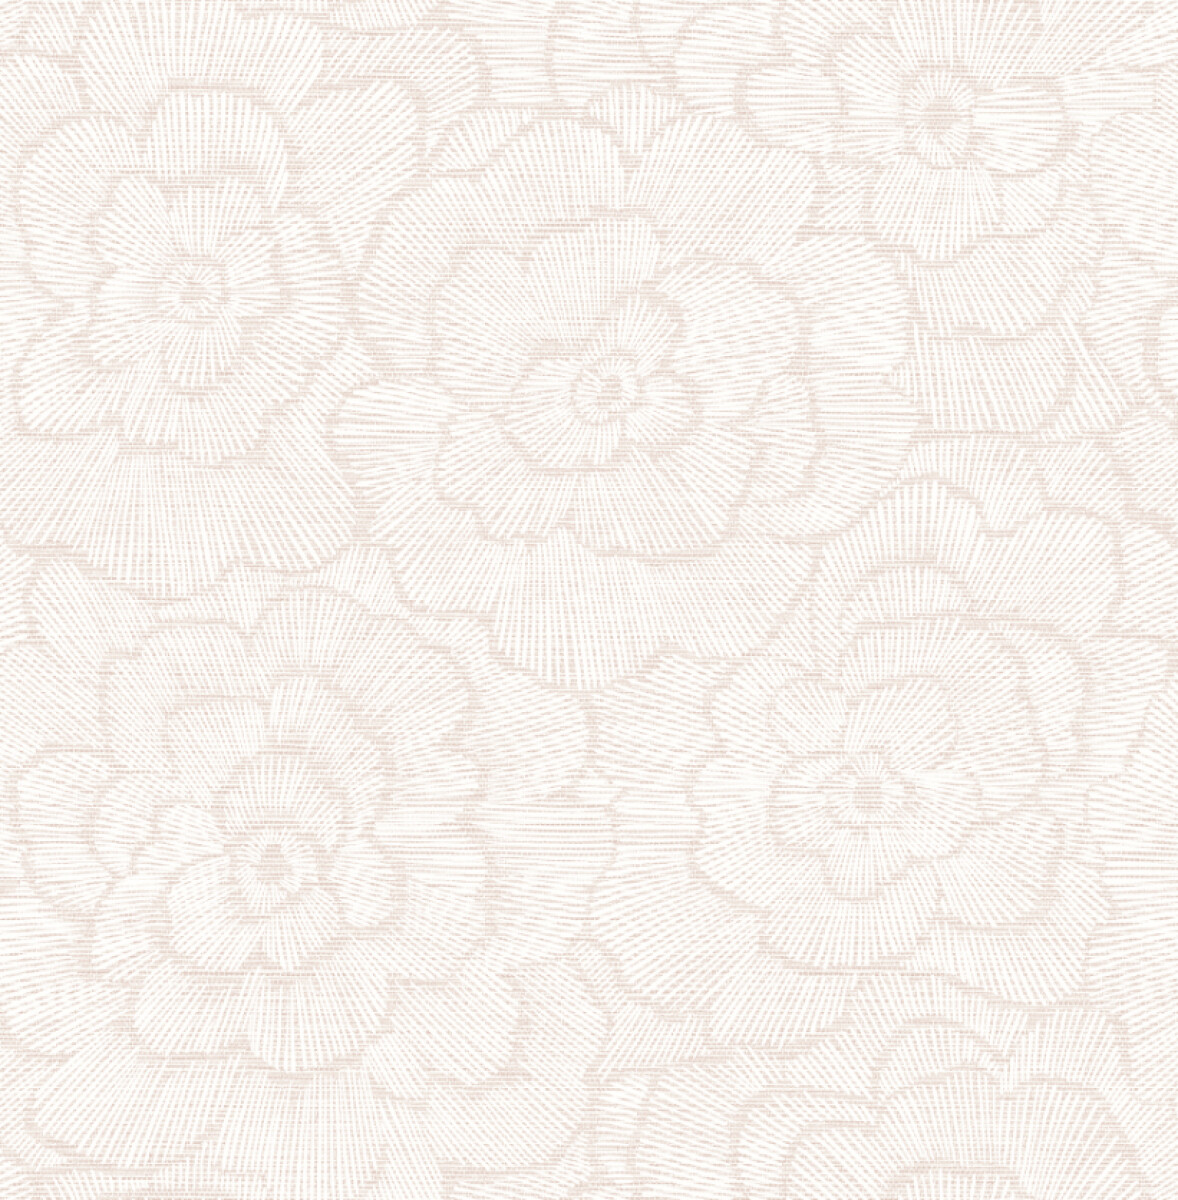 COLECCIÓN PACIFICA - PERIWINKLE PINK TEXTURED FLORAL - 